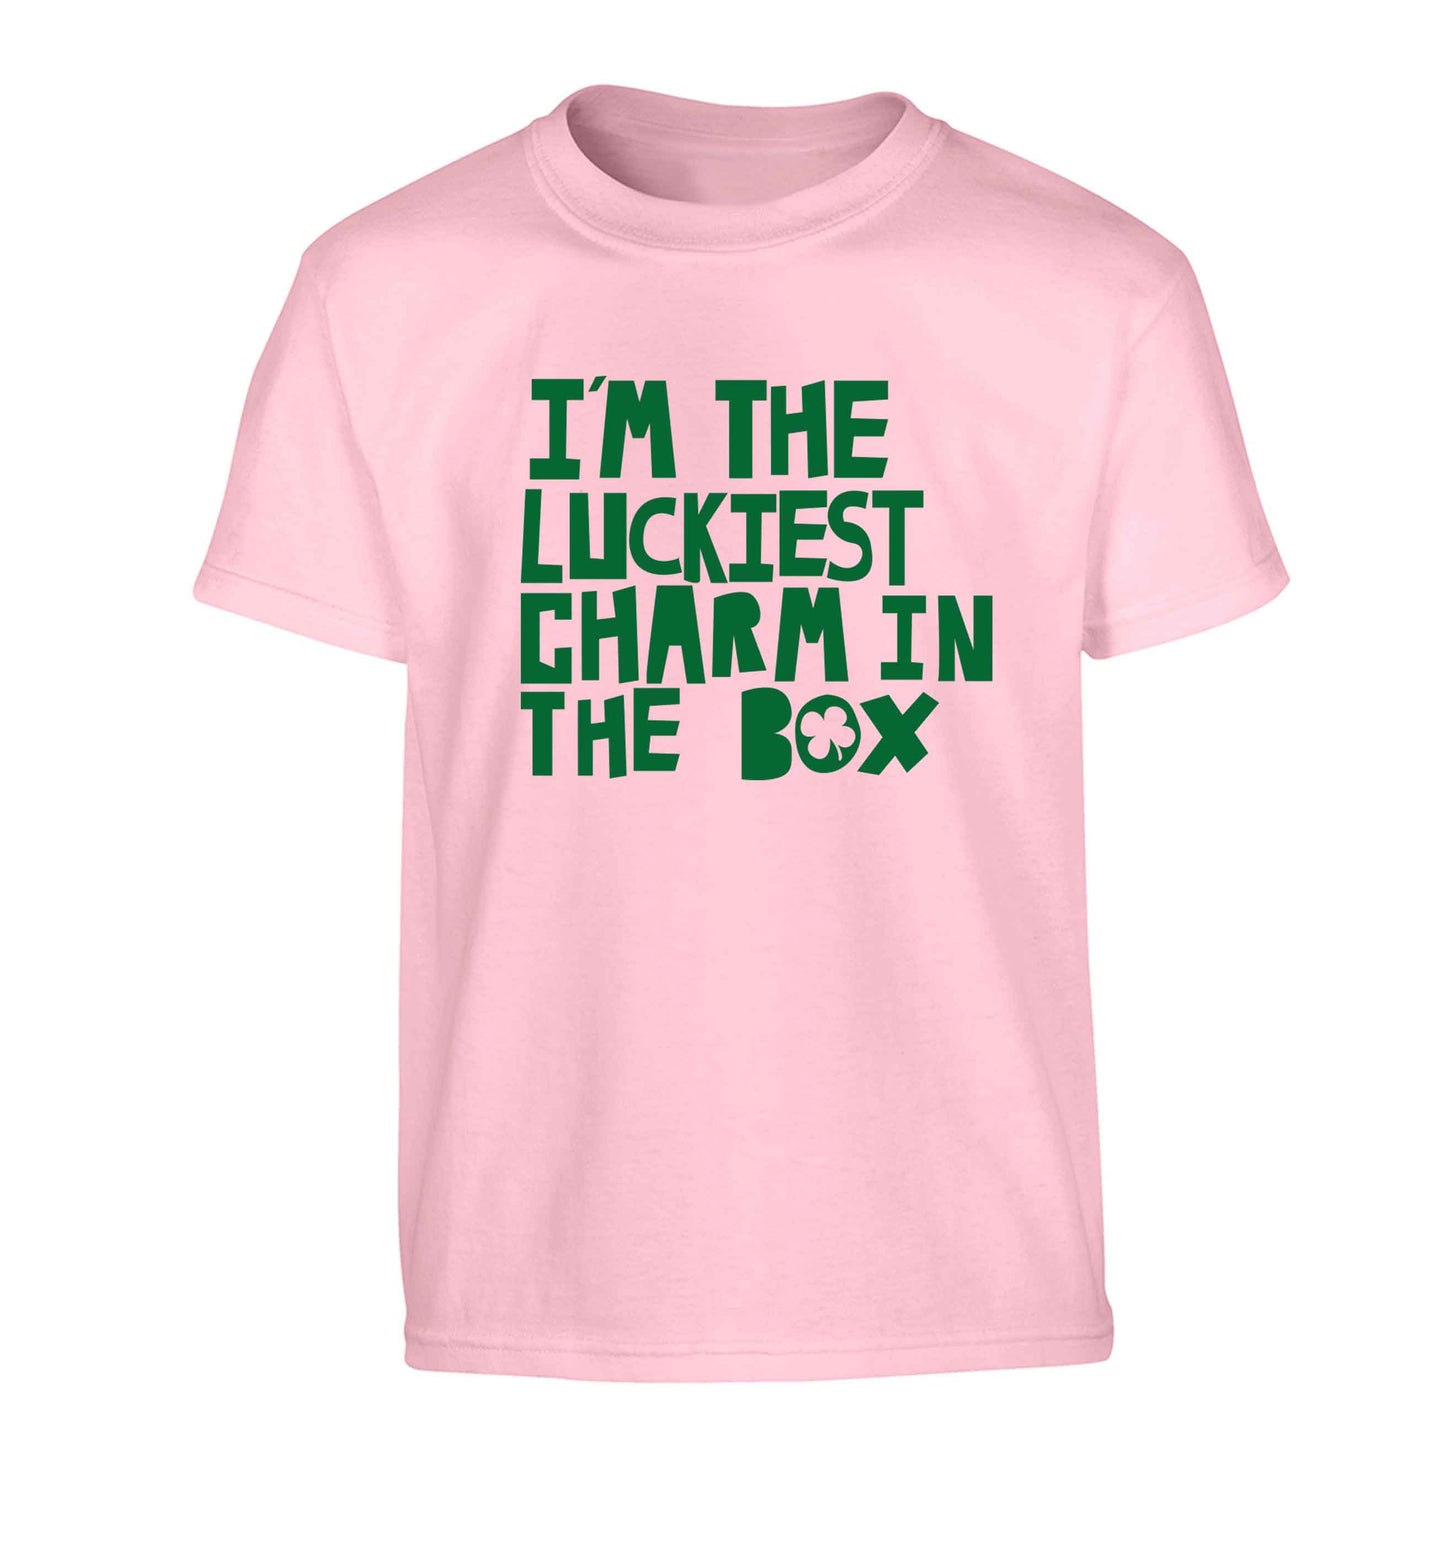 I'm the luckiest charm in the box Children's light pink Tshirt 12-13 Years